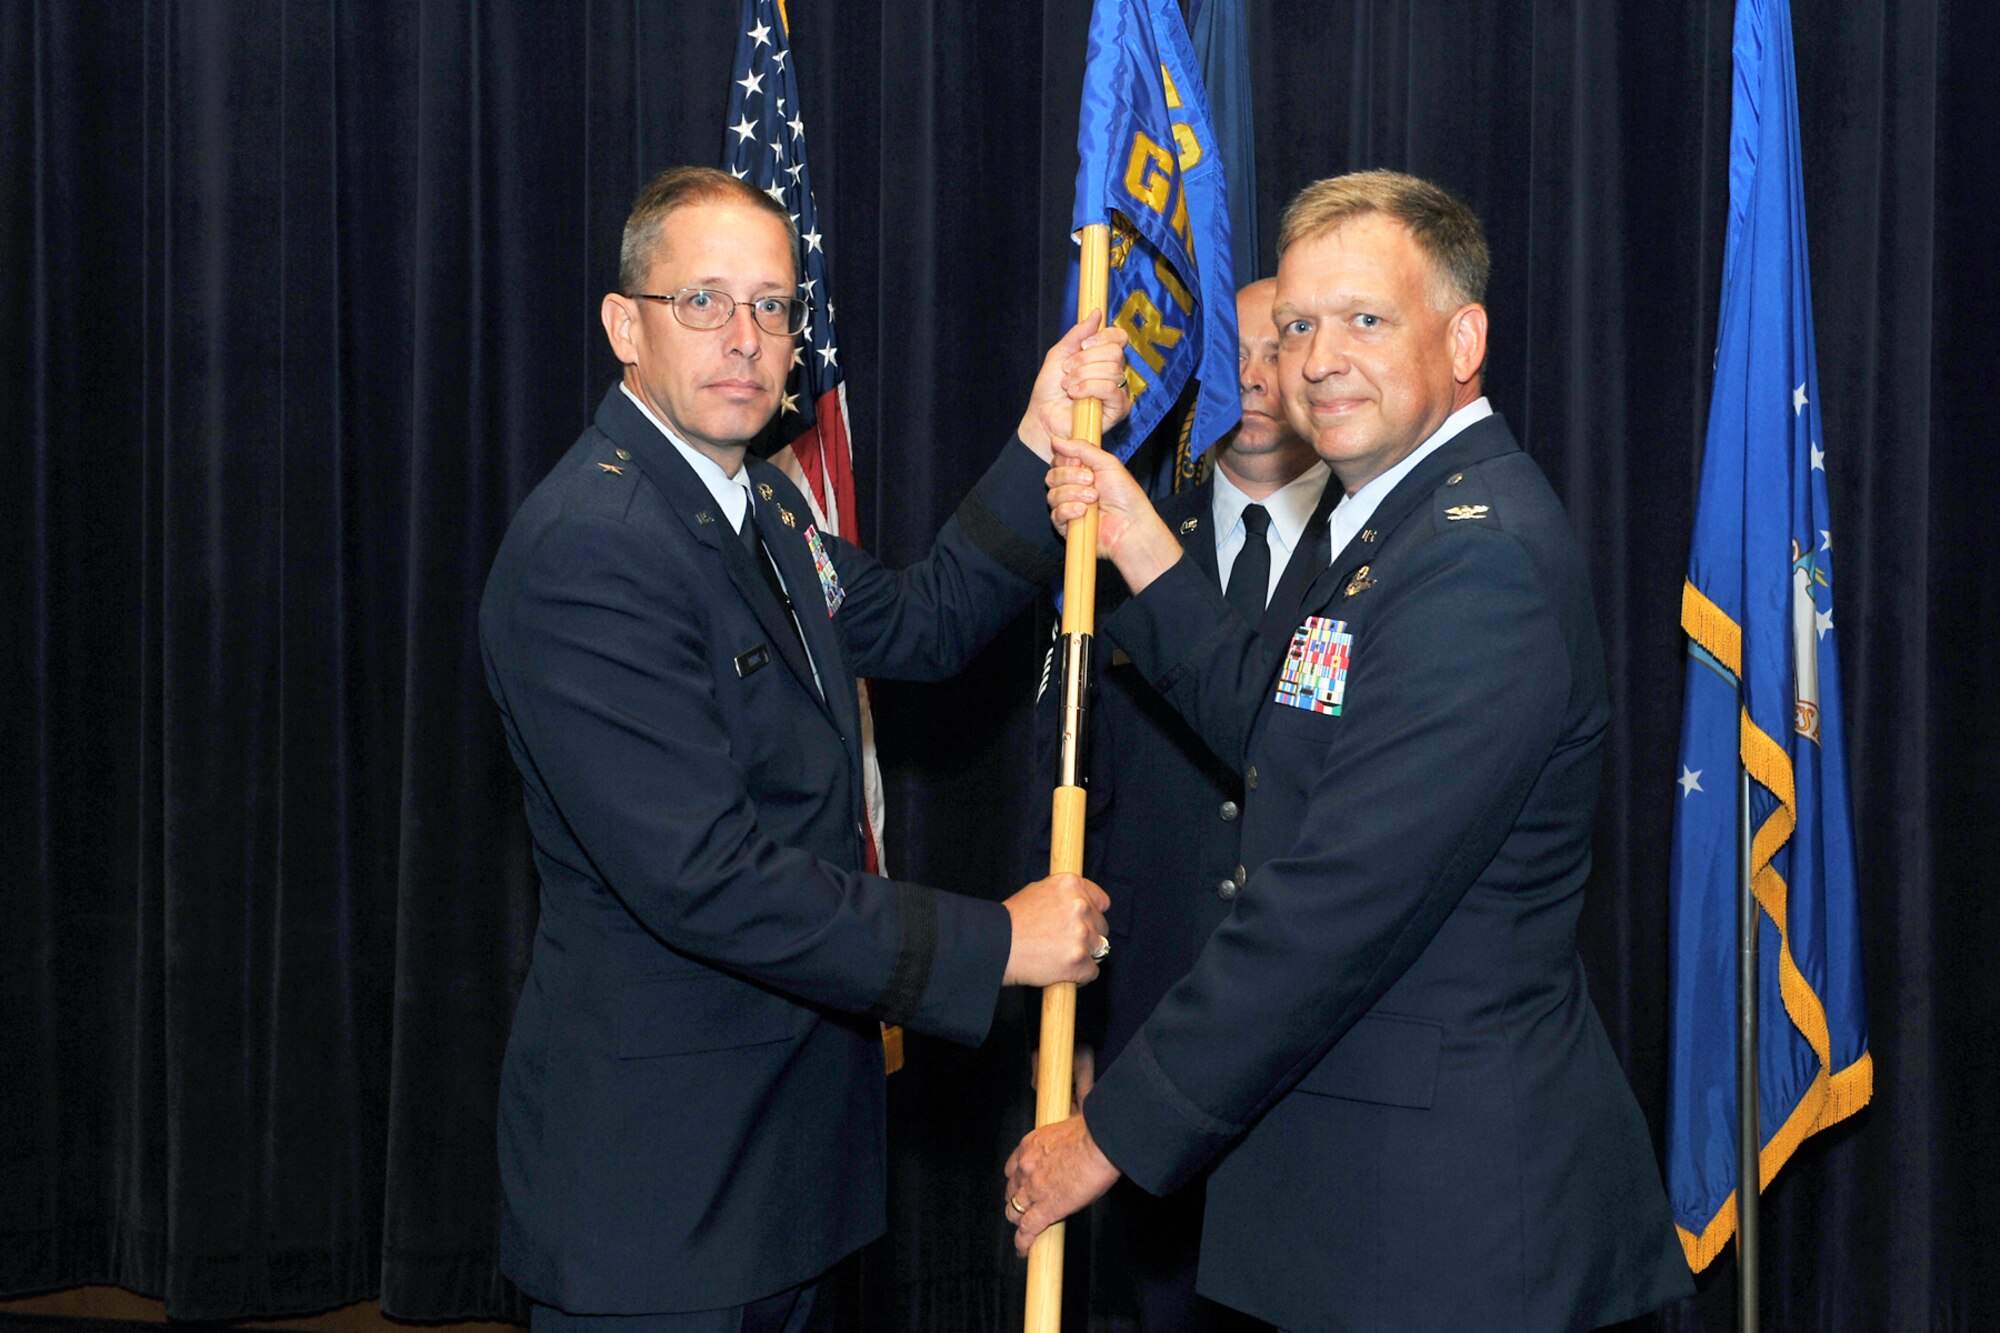 U.S. Air Force Col. Mark White, 170th Group commander, relinquishes command and passes the guidon to Brig. Gen. Daryl Bohac, assistant adjutant general, Nebraska Air National Guard, during a change of command ceremony inside the Air Force Weather Agency's auditorium on Offutt Air Force Base, Neb., July 9. (U.S. Air Force Photo by Charles Haymond/Released)
